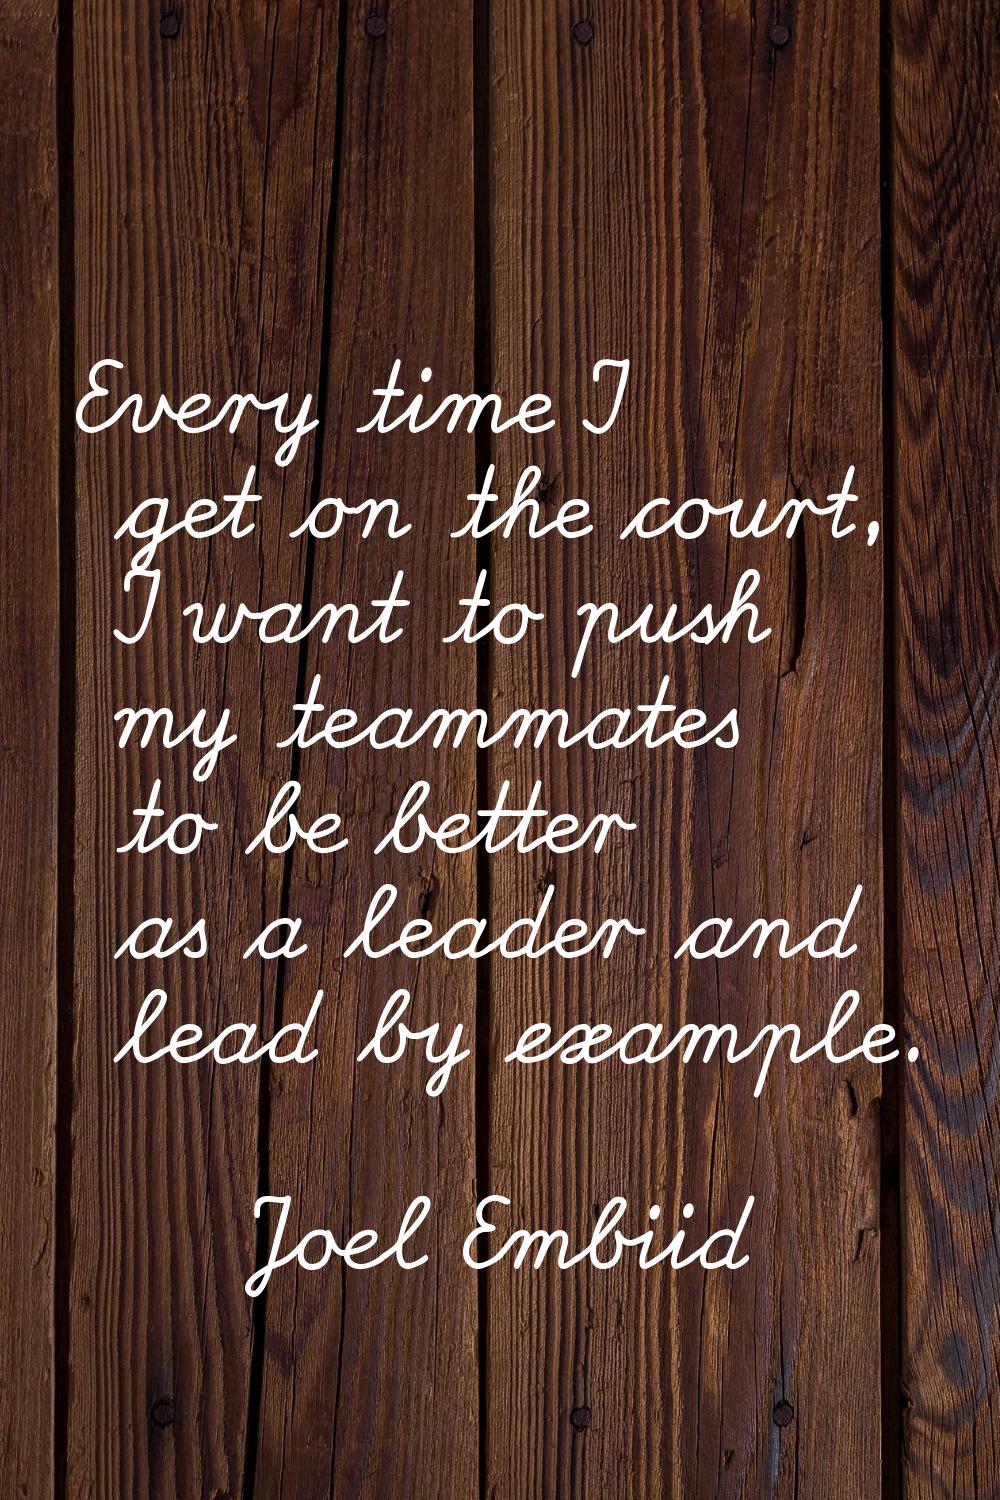 Every time I get on the court, I want to push my teammates to be better as a leader and lead by exa